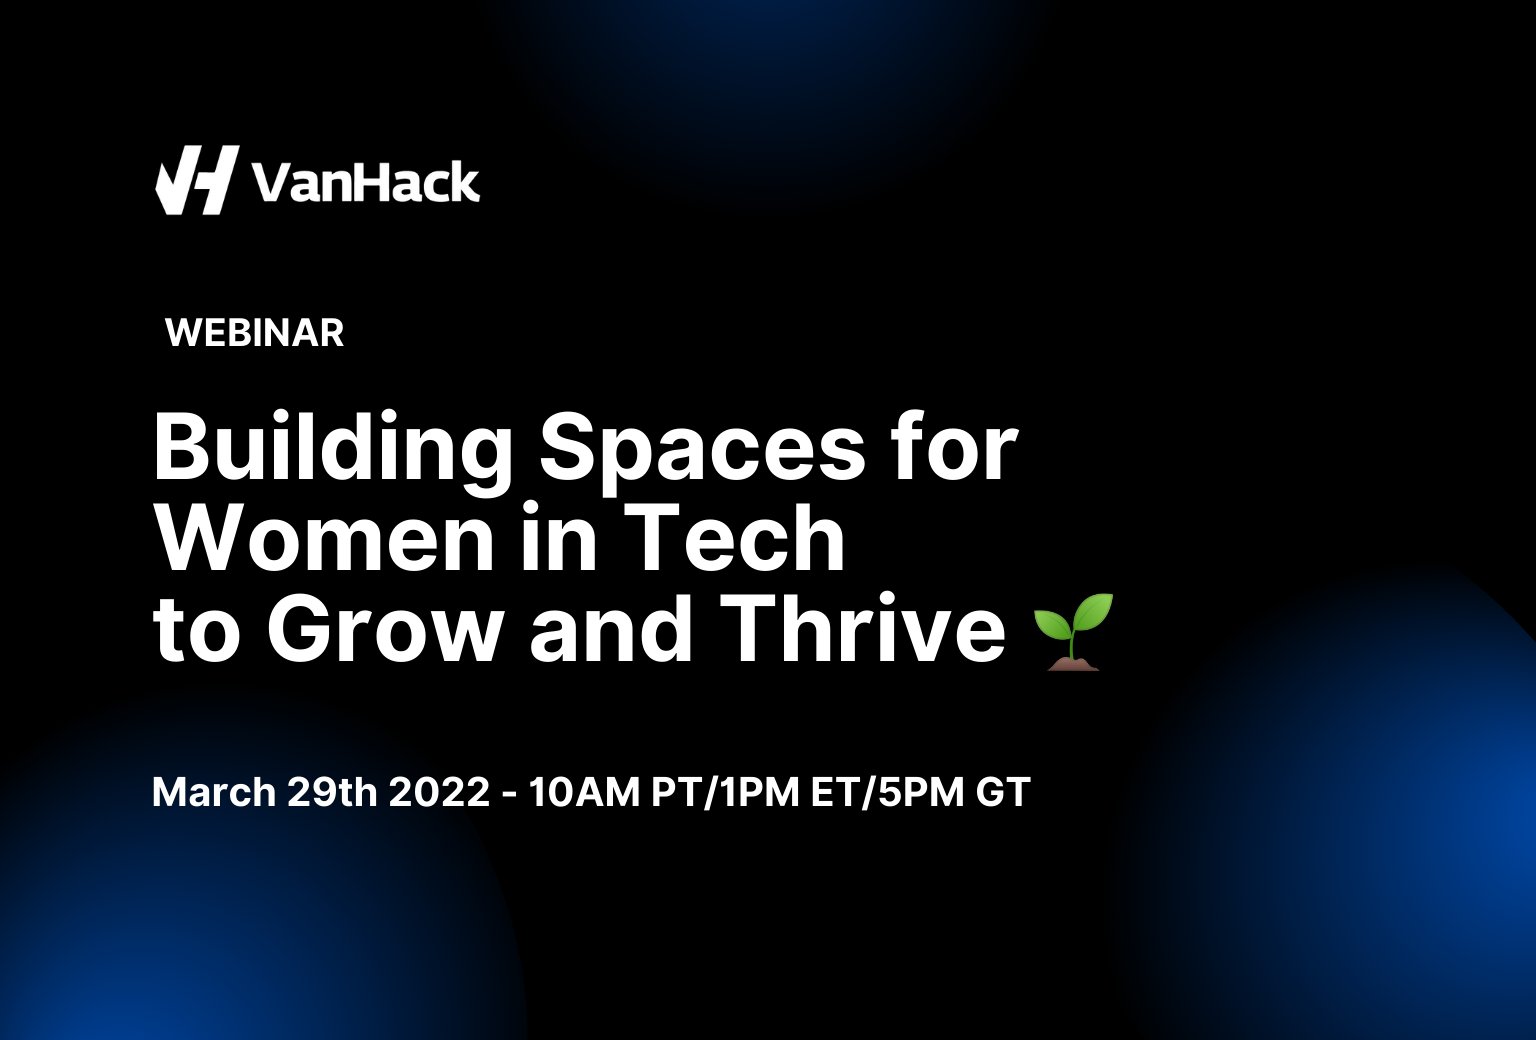 Building Spaces for Women in Tech to Grow and Thrive